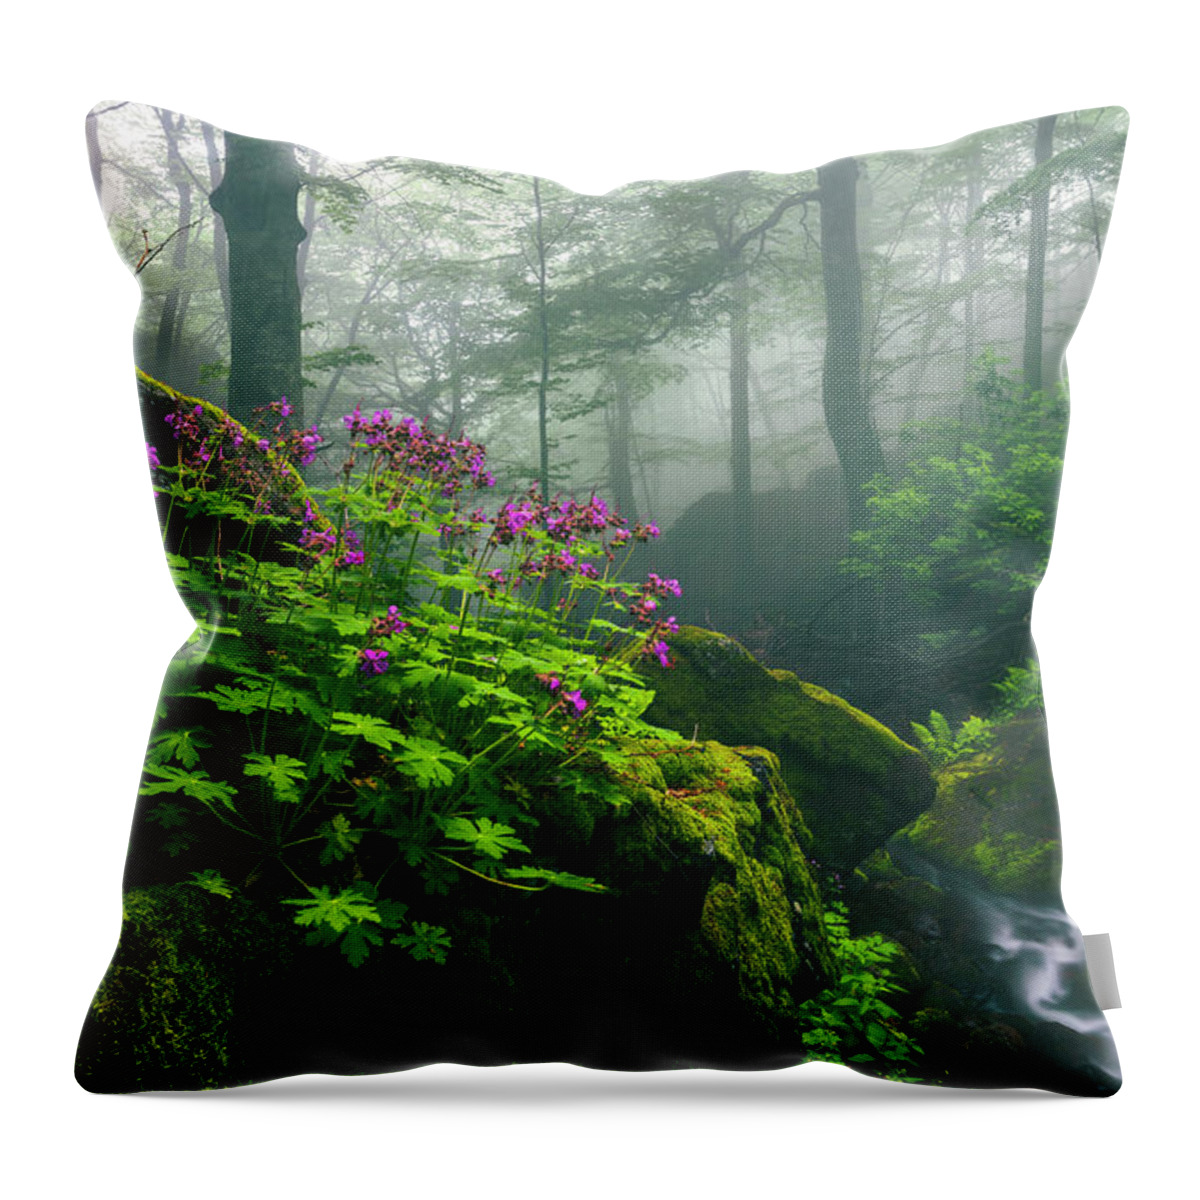 Geranium Throw Pillow featuring the photograph Scent of Spring by Evgeni Dinev